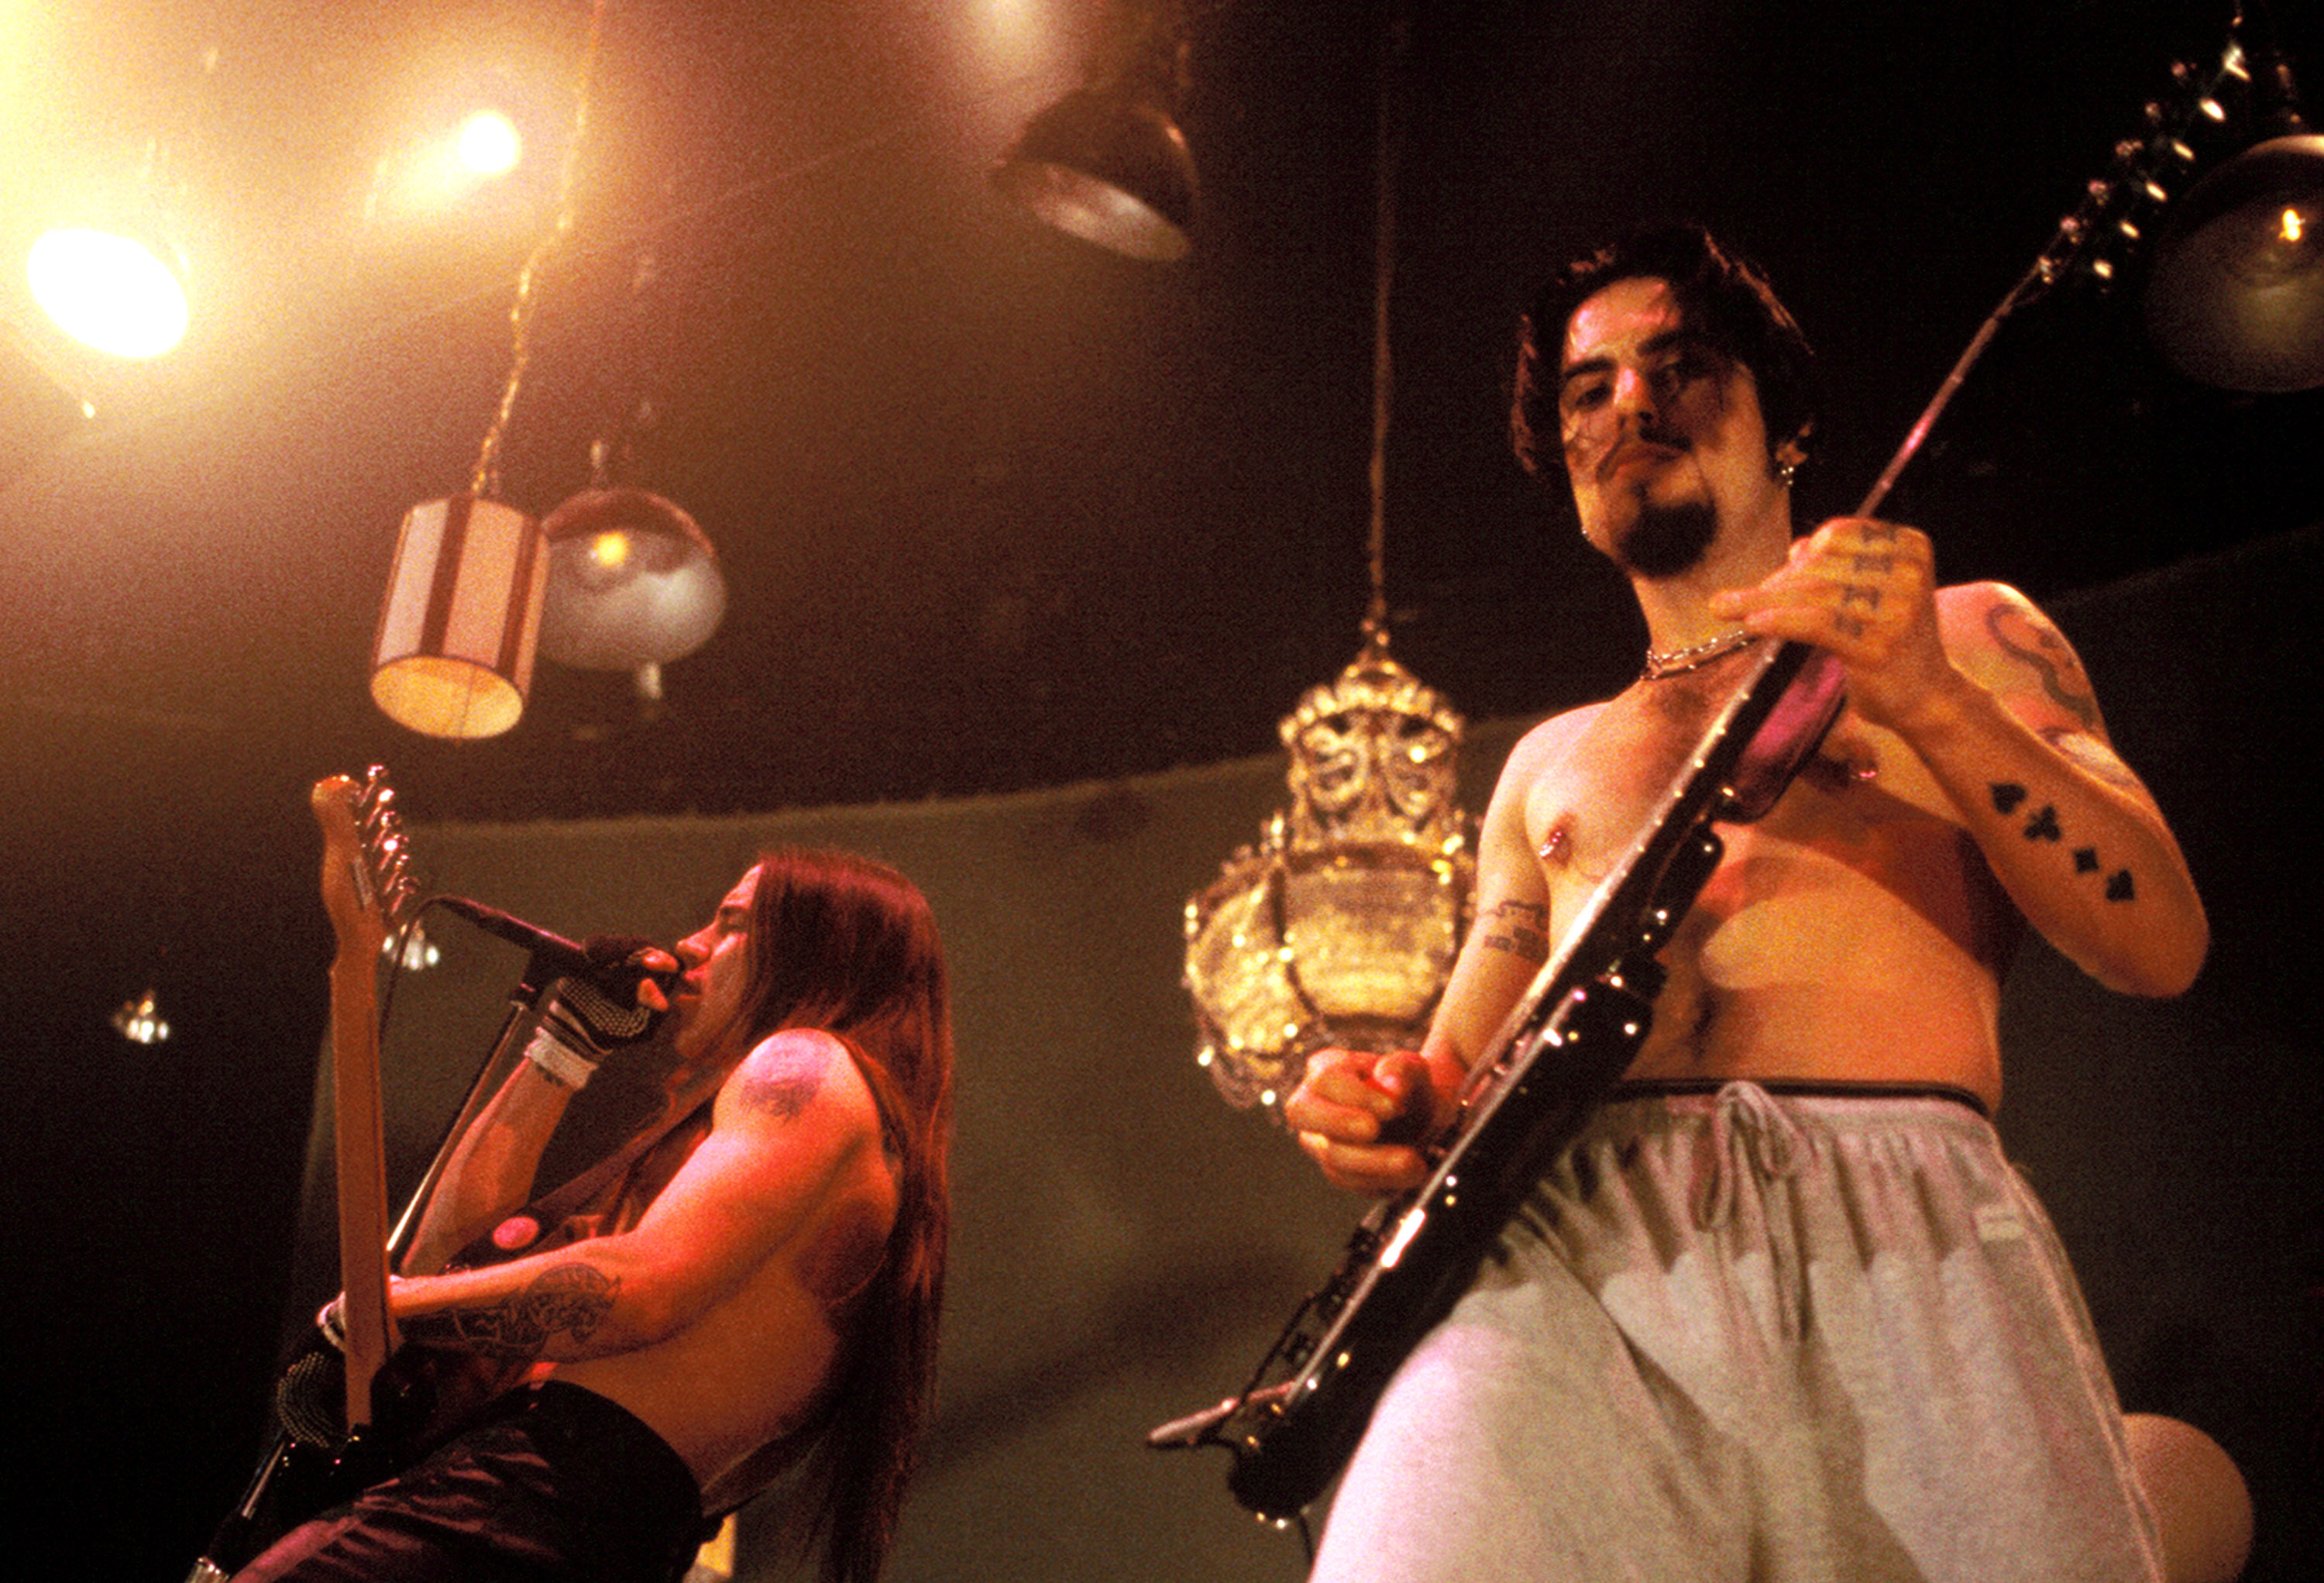 To Live and Die in L.A.: Our 1996 Red Hot Chili Peppers Cover Story